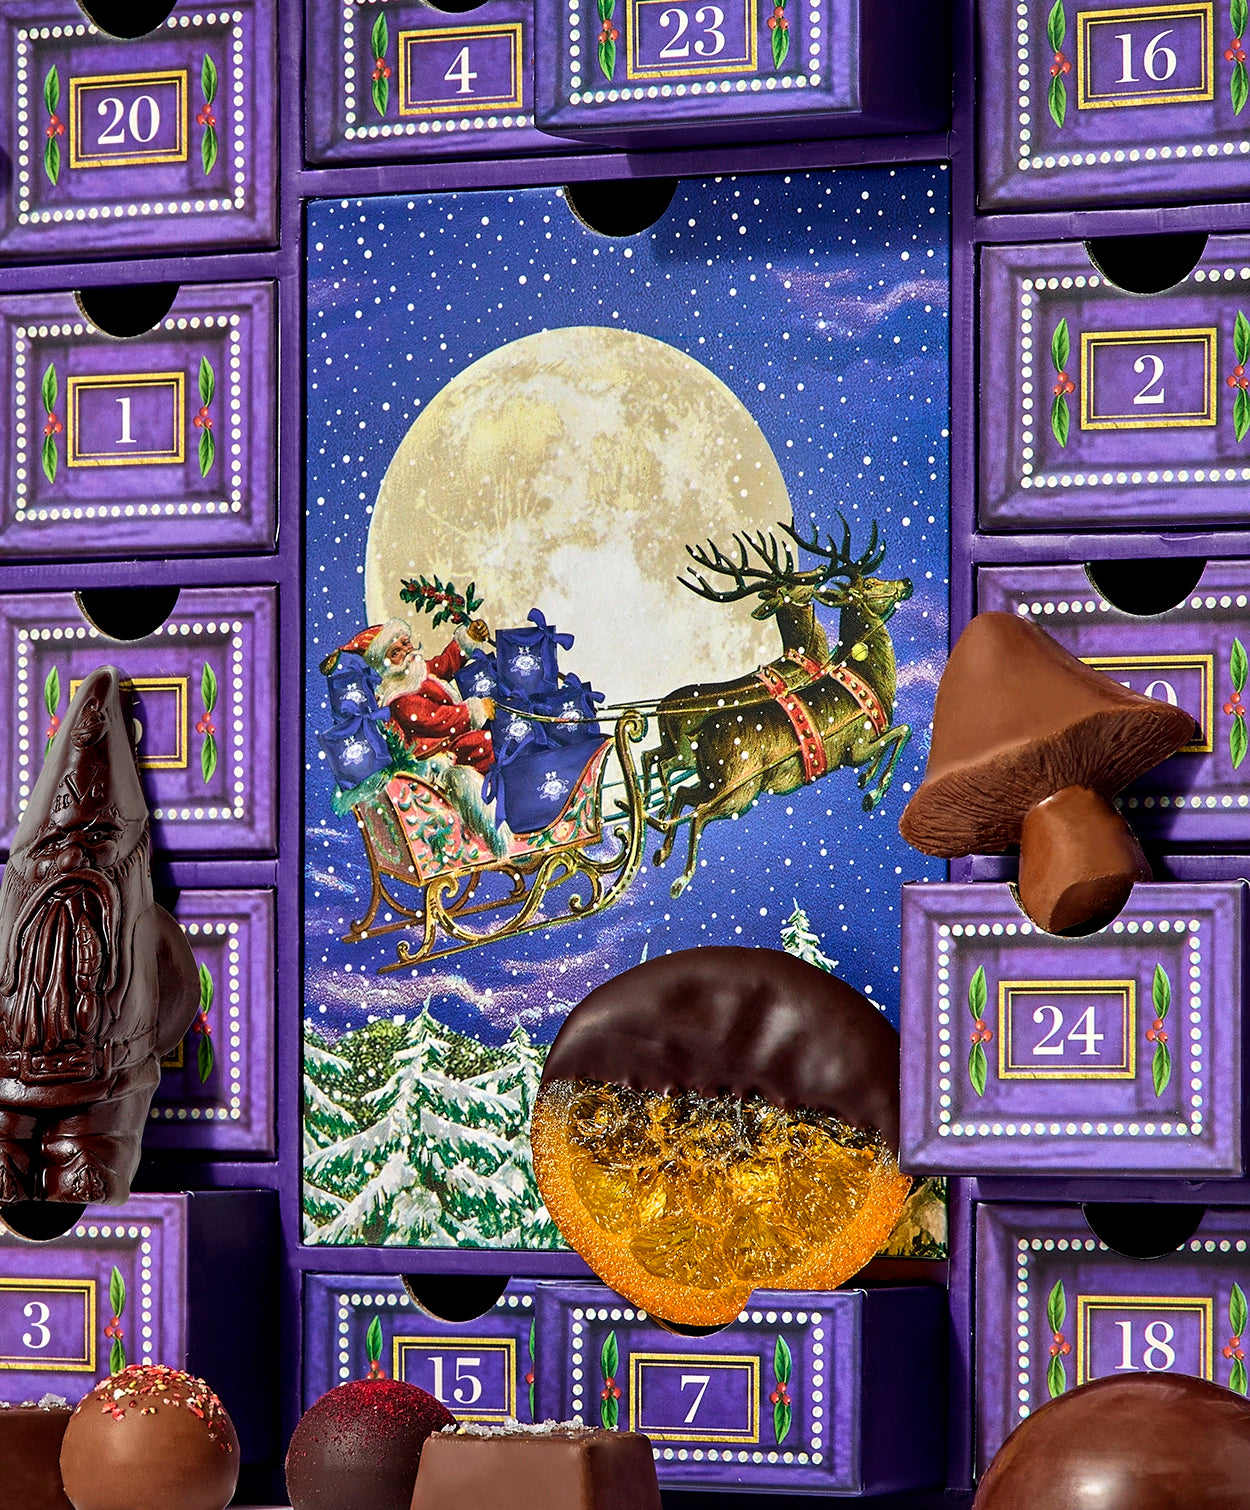 Santa and his Sleigh drawn by two reindeer fly in front of a full moon as the centerpiece drawer in the Vosges Calendar of Advent.